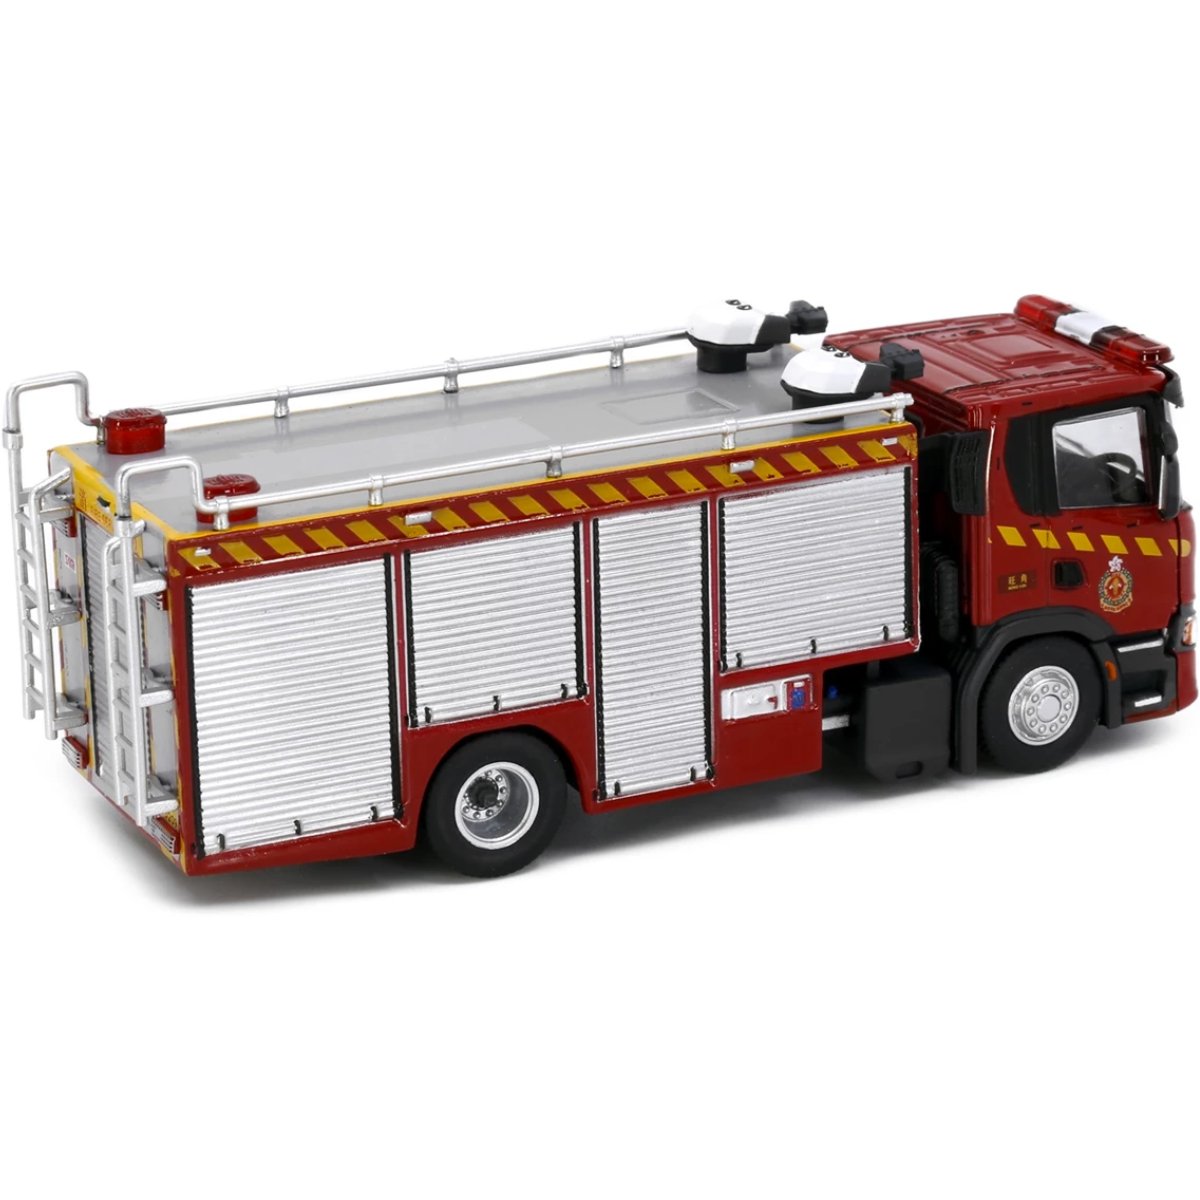 Tiny Models Scania Reserve Heavy Pump F5209 (1:76 Scale) - Phillips Hobbies